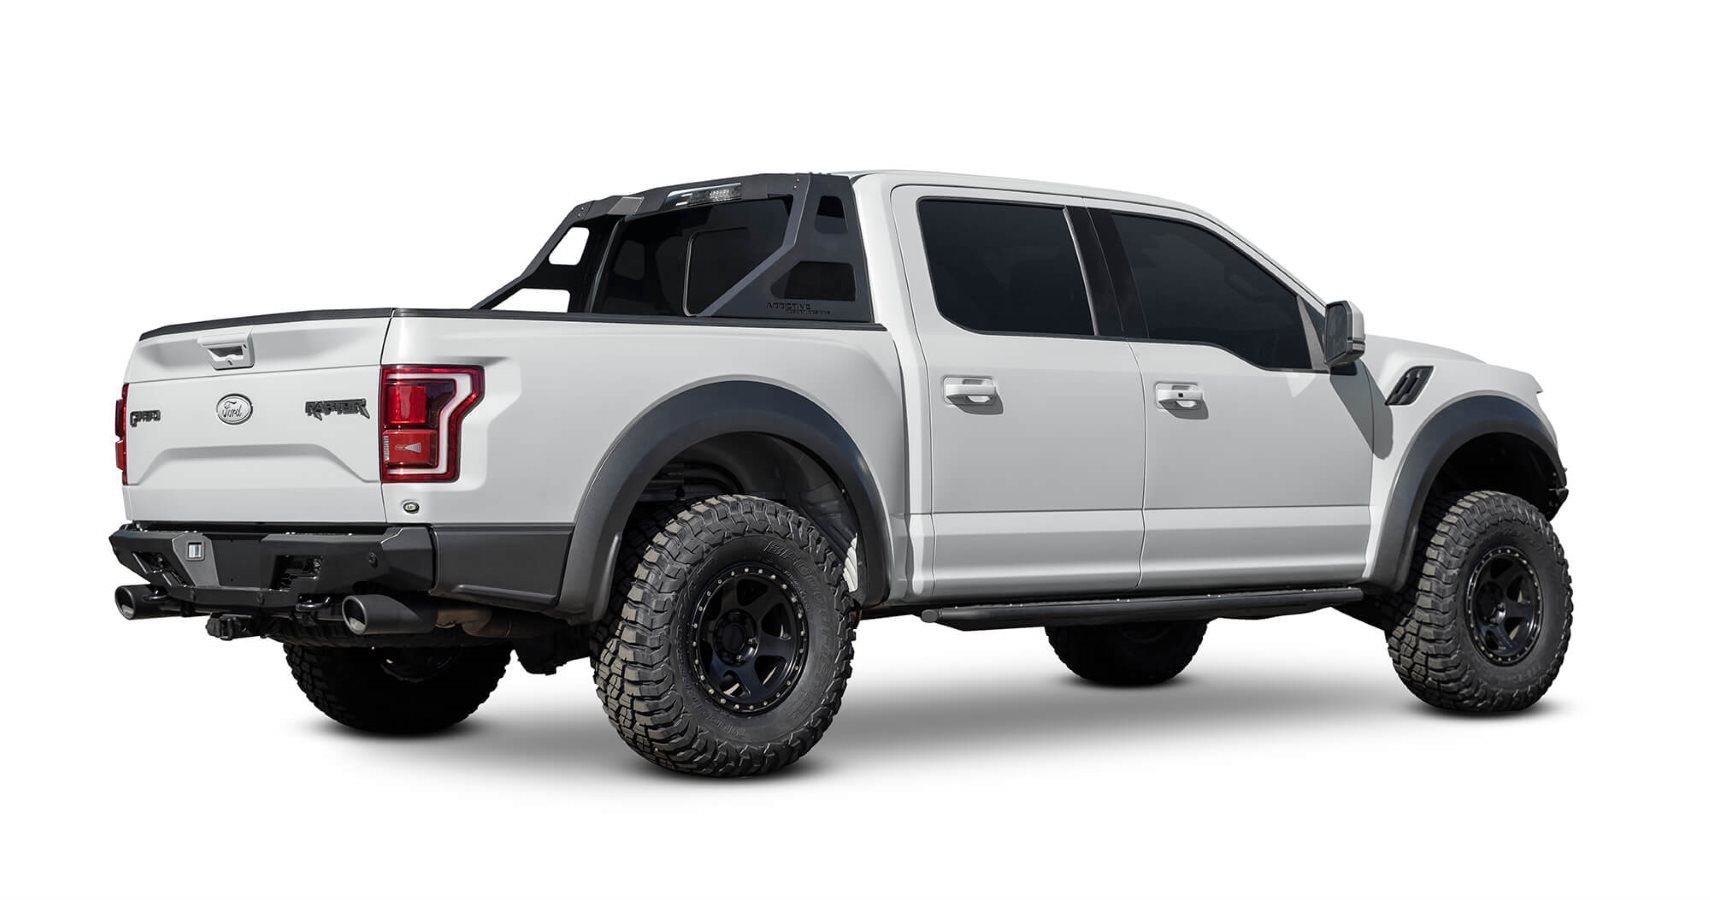 Addictive Desert Designs Returns With New Upgrades For The Ford Raptor